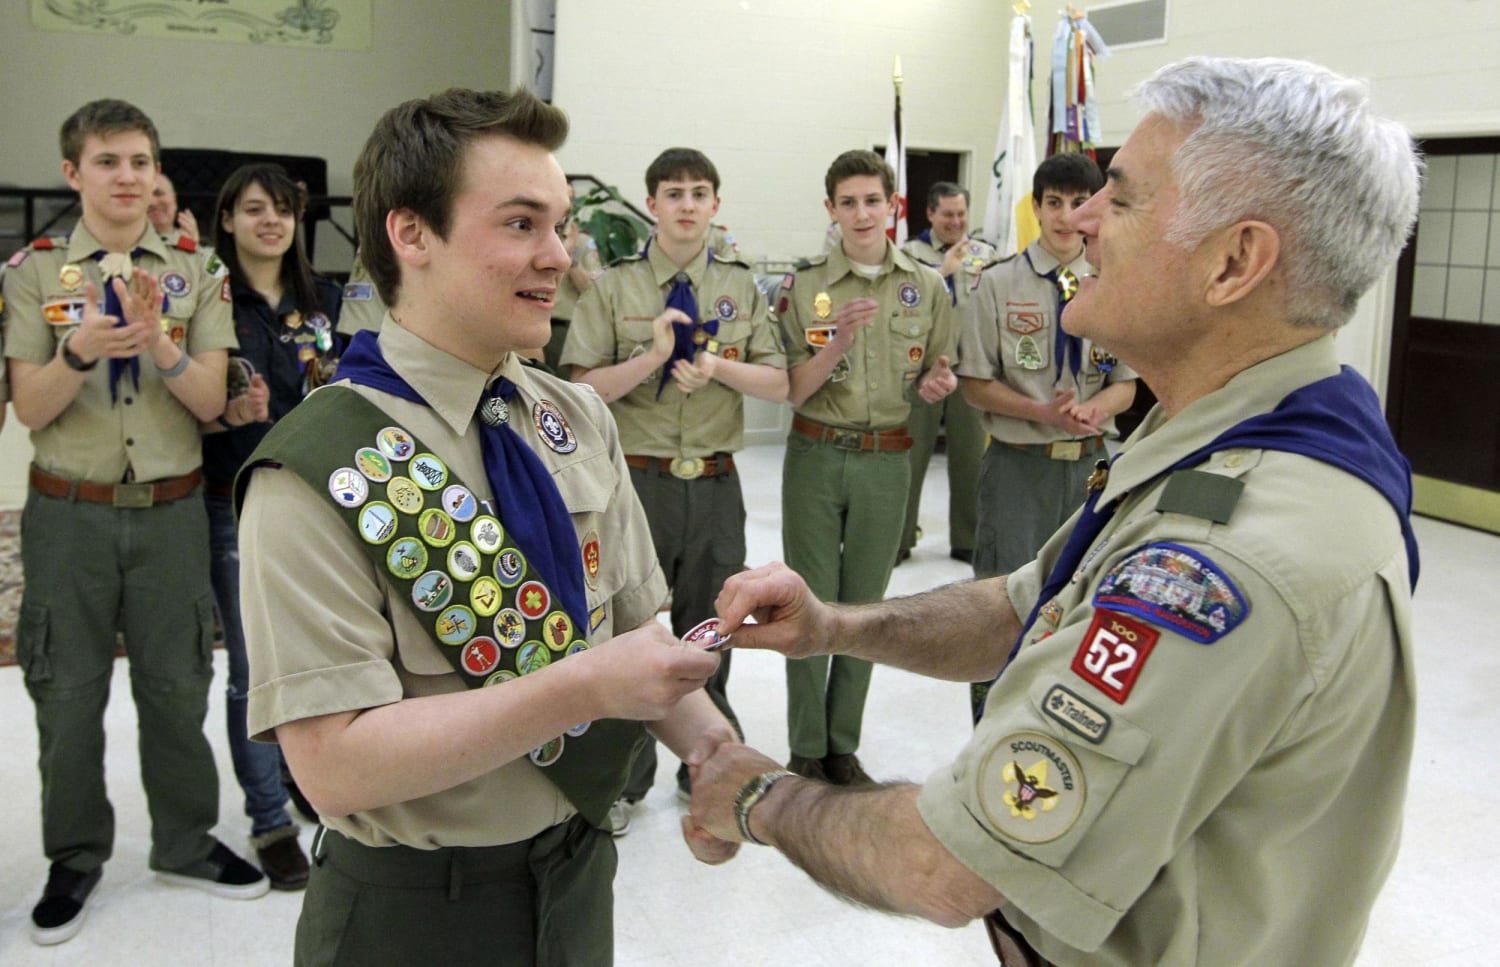 A gathering of Eagle scouts